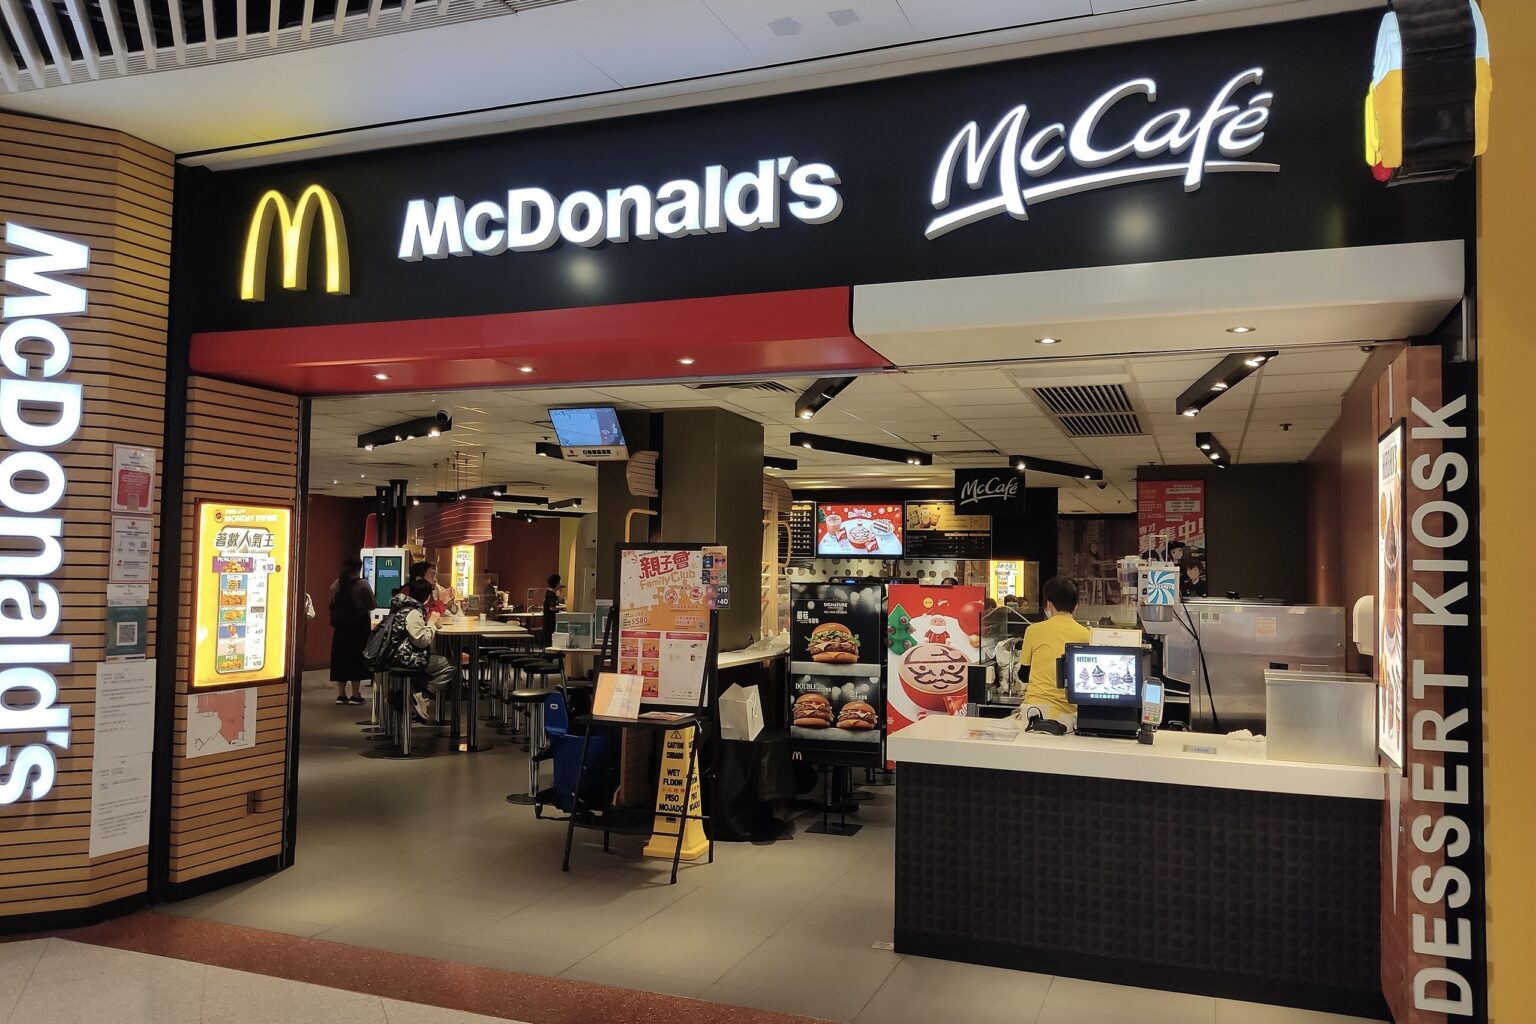 The exteriors of a McDonald's outlet in Hong Kong.